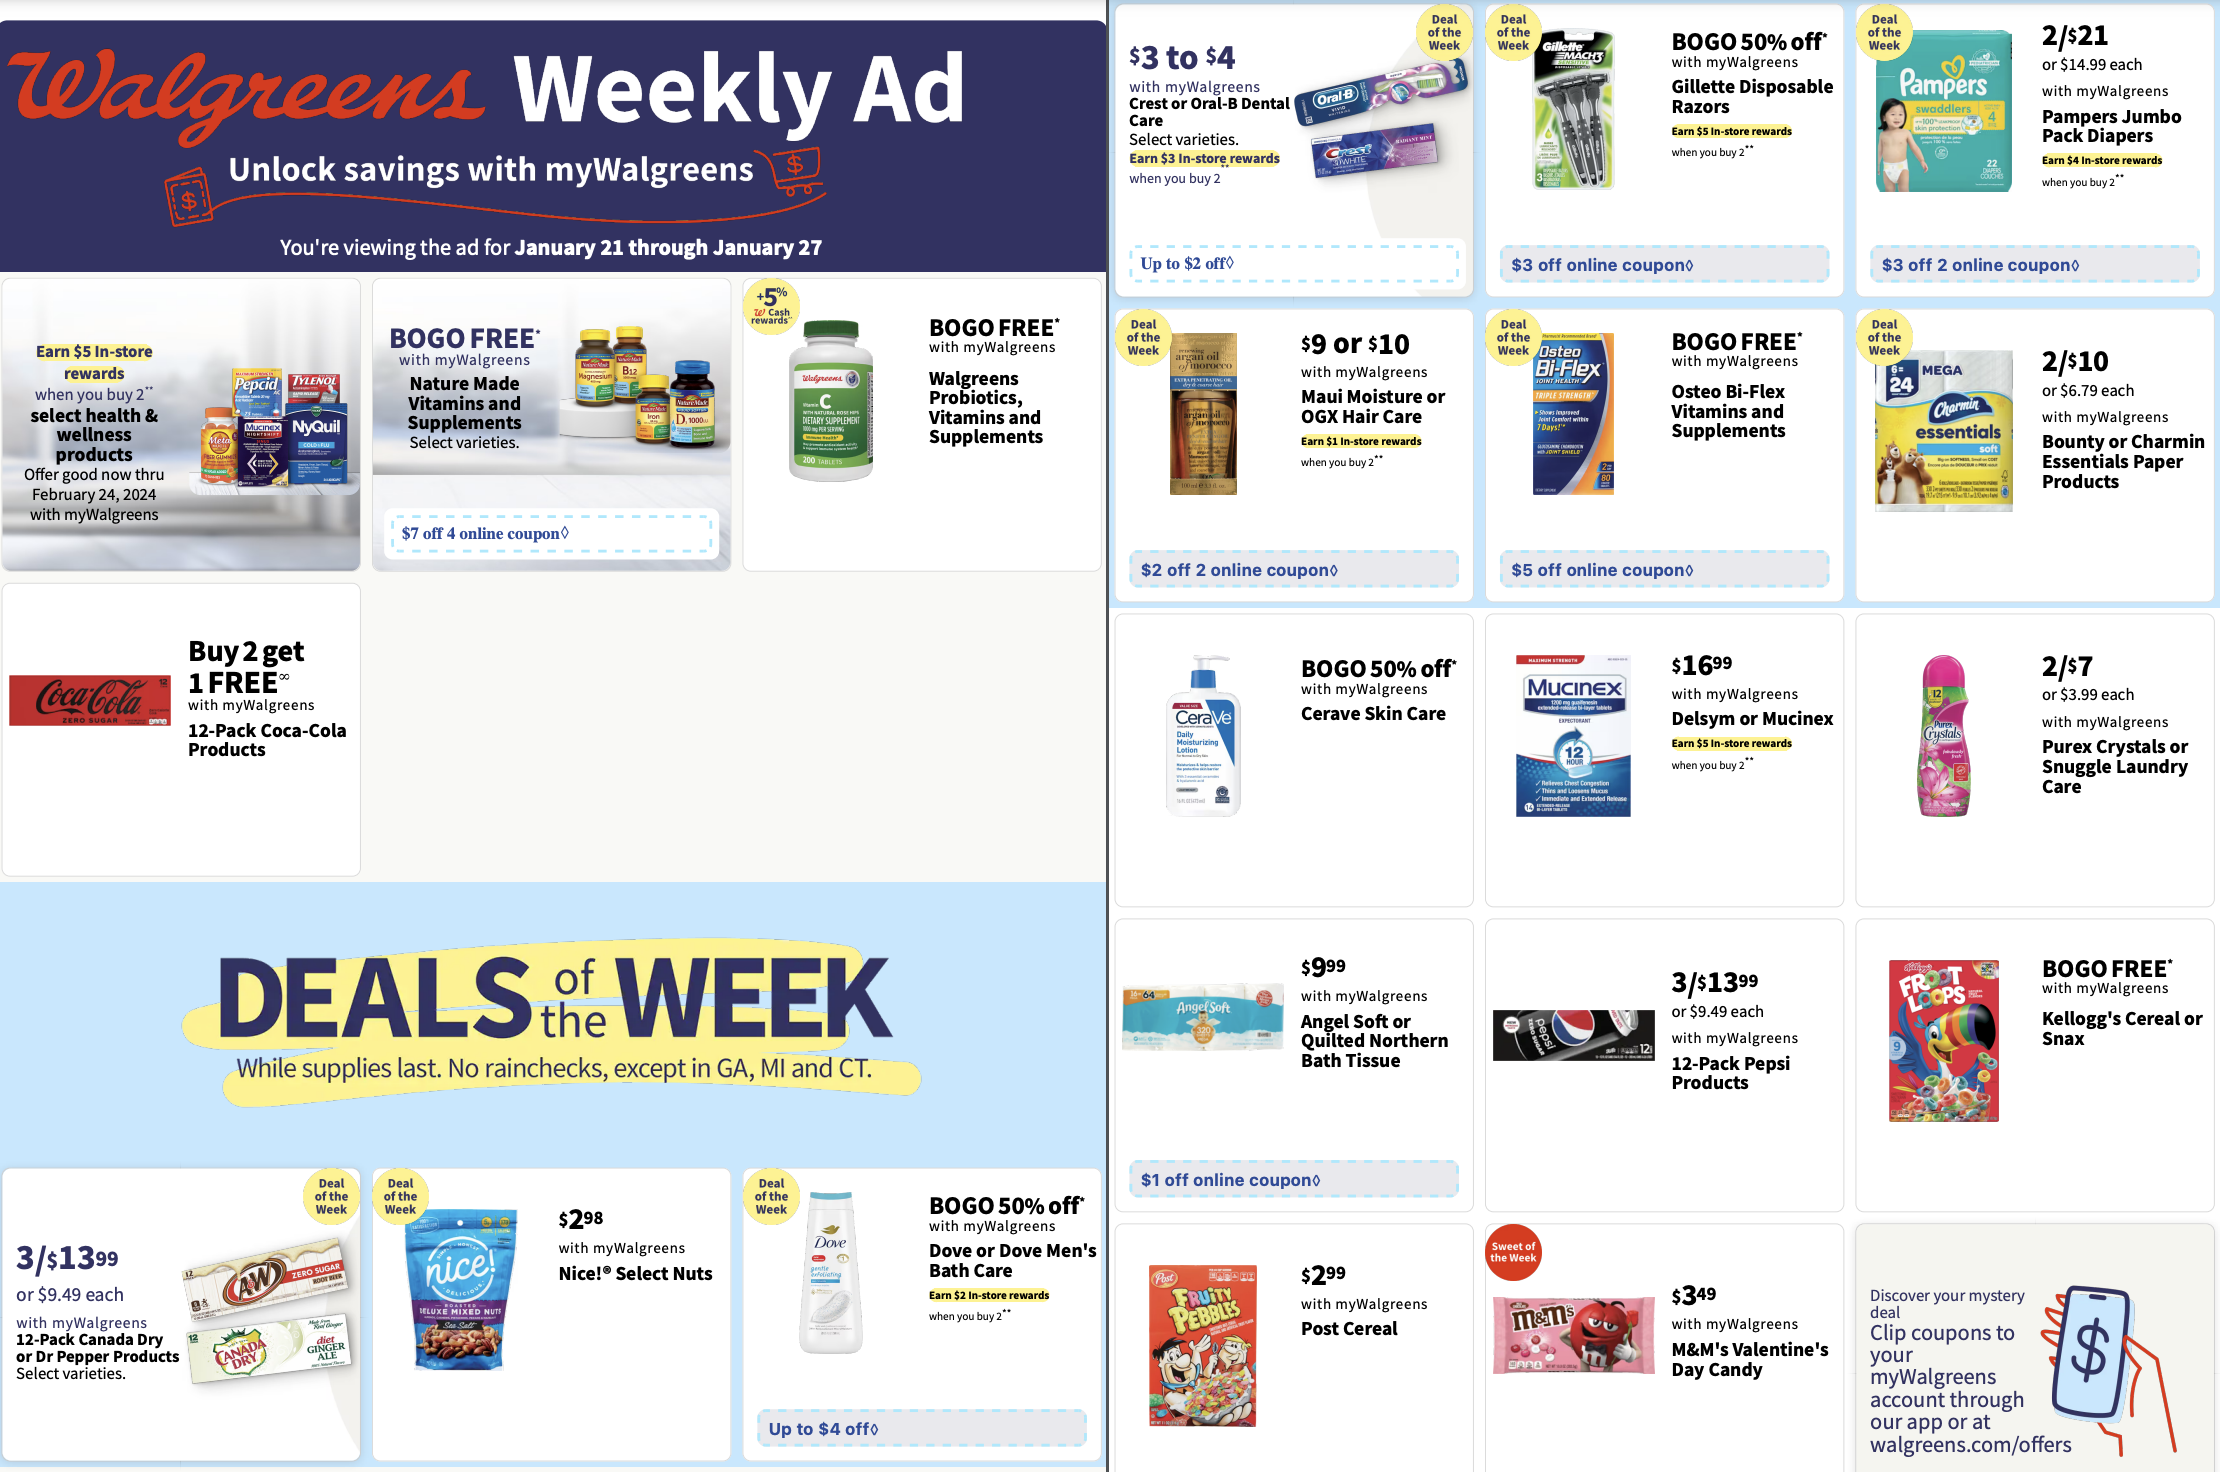 Weekly Deals & Coupons